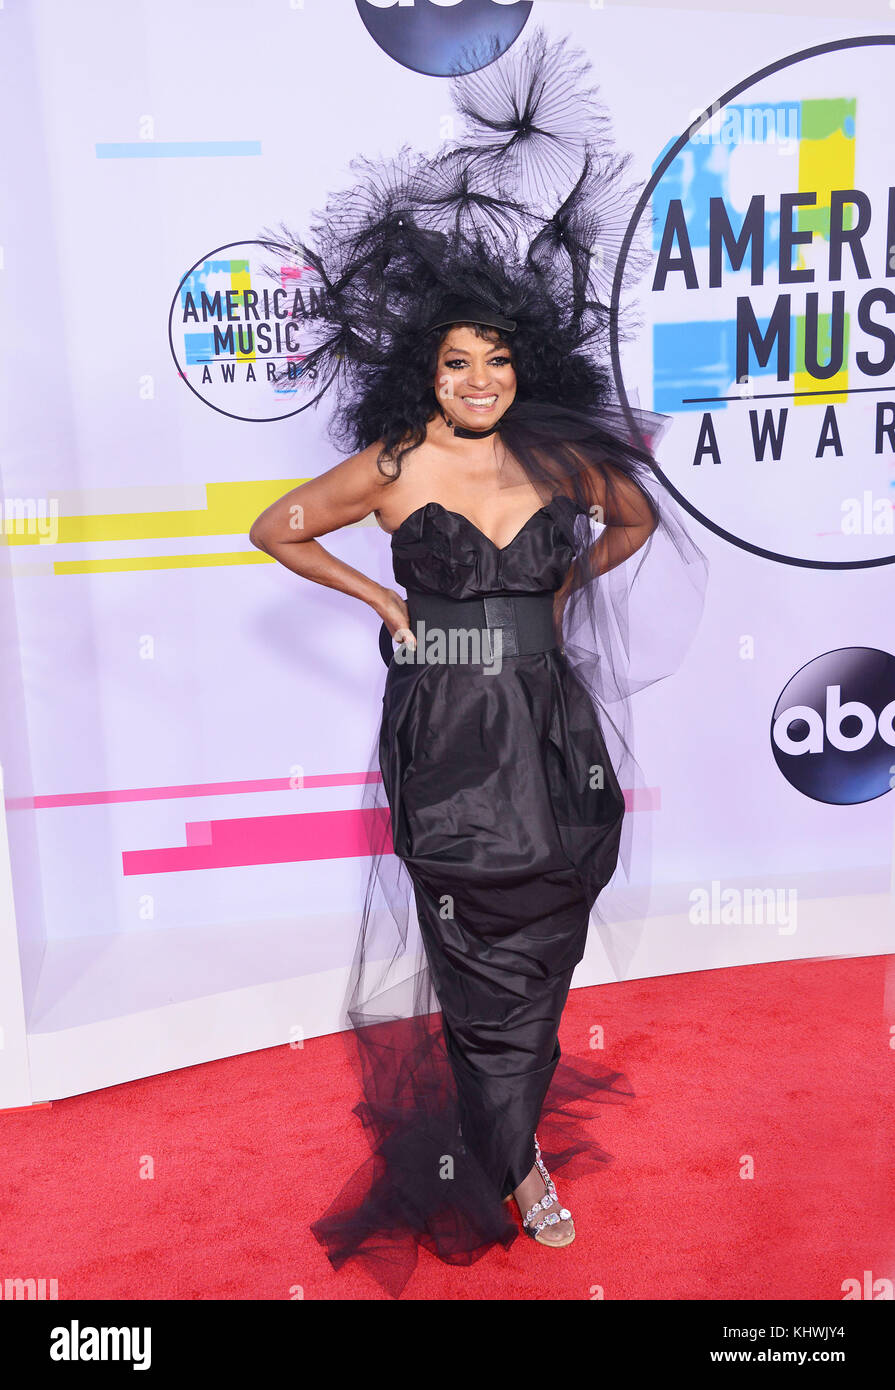 Los Angeles, USA. 19th Nov, 2017. Diana Ross 304 arrives at the 2017 American Music Awards at Microsoft Theater on November 19, 2017 in Los Angeles, California Credit: Tsuni/USA/Alamy Live News Stock Photo